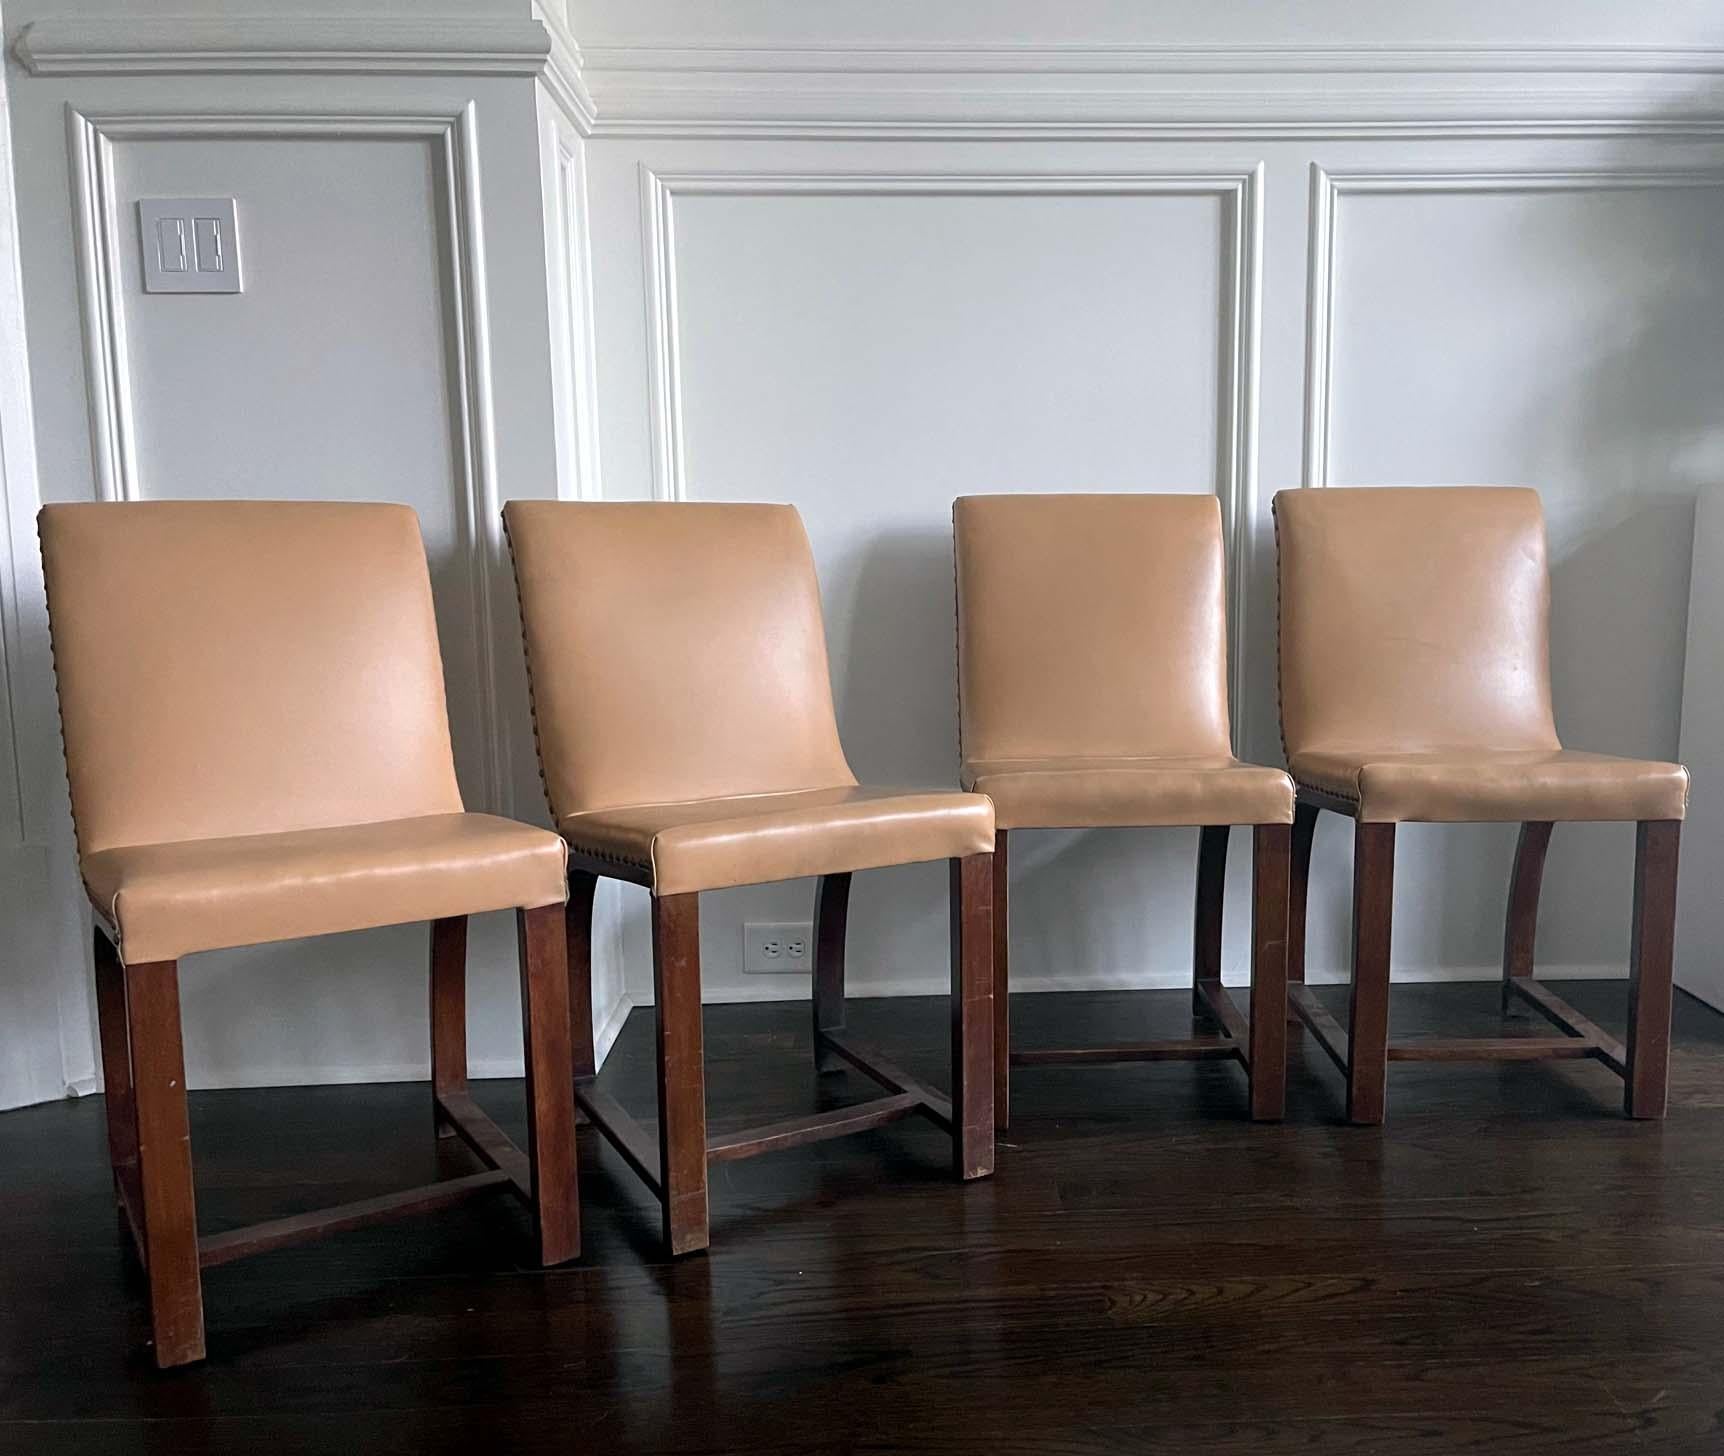 A set of four chairs designed in 1930s by Gilbert Rohde for Heywood Wakefield Gardener MA. Mahogany construction with arched back support. Cream color naugahyde upholstery with decorative brass taps is likely original. All labeled as shown.
    